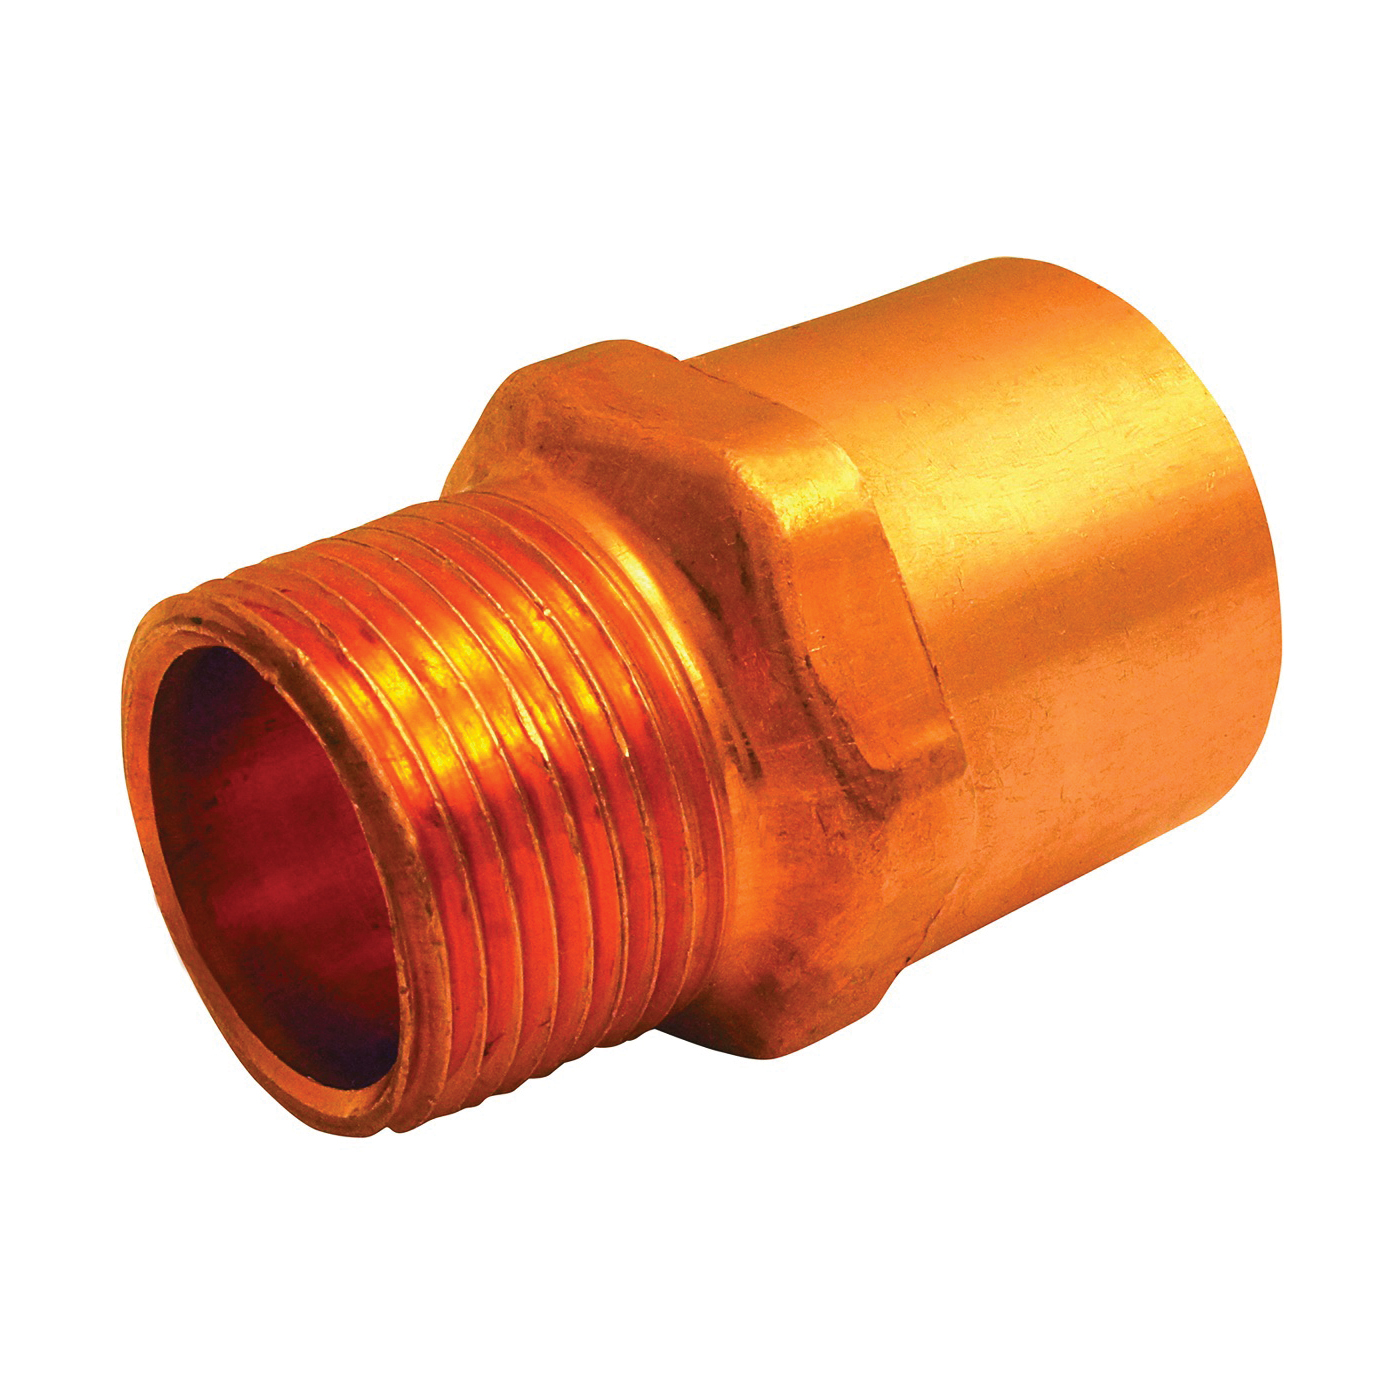 104R Series 30336 Reducing Pipe Adapter, 3/4 x 1 in, Sweat x MNPT, Copper